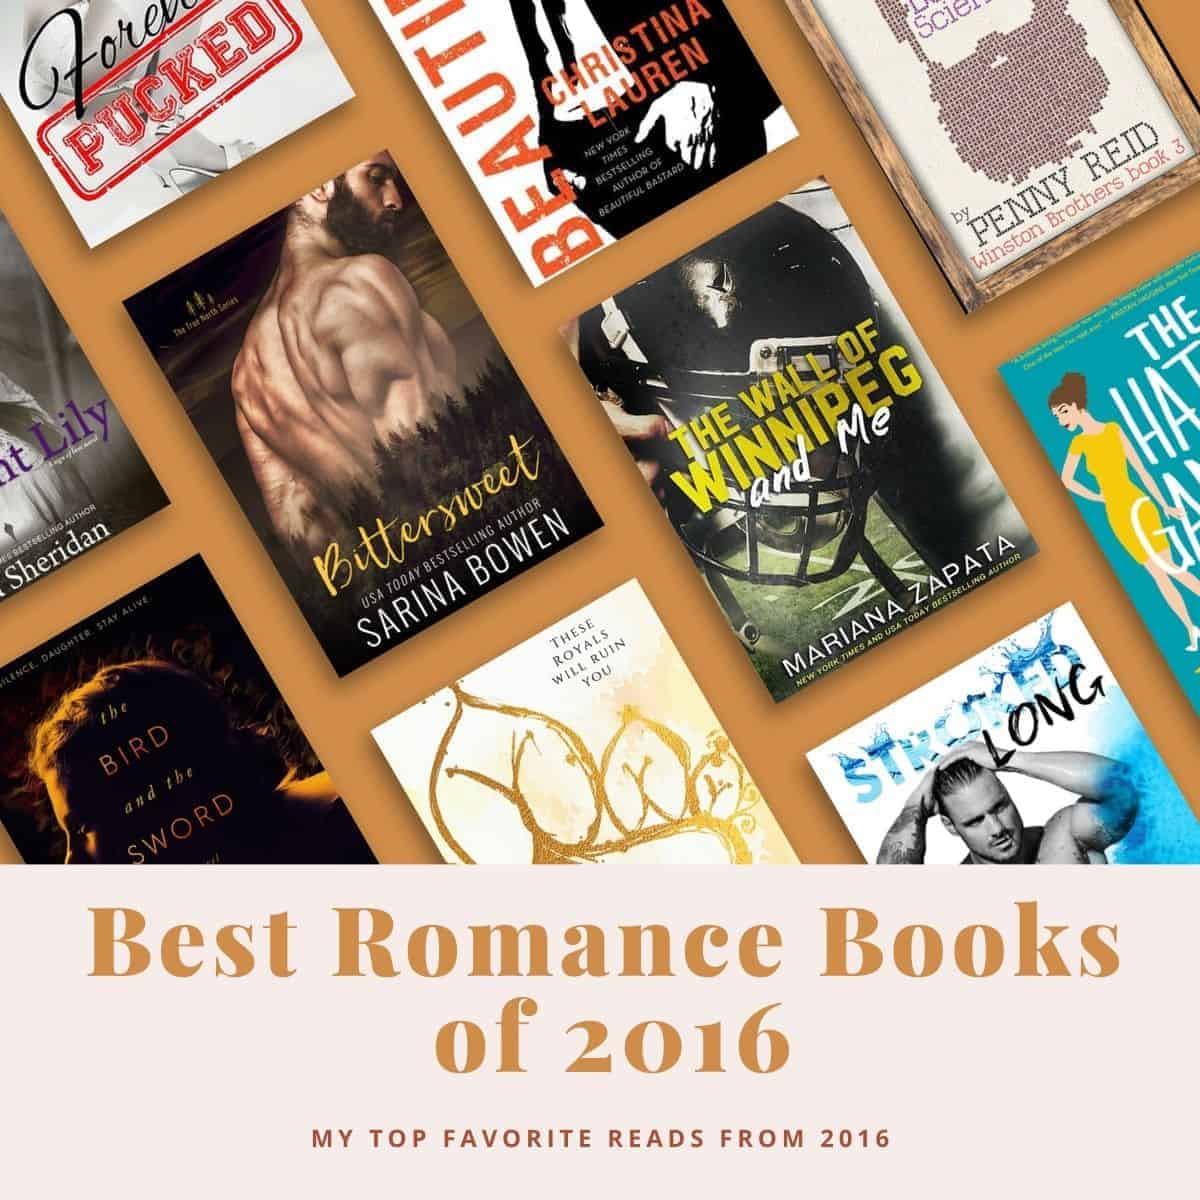 Totally Bex's top romance favorites from 2016 (including romantic comedy, sports romance books, dark romance books, historical fiction, mature YA, & more!)